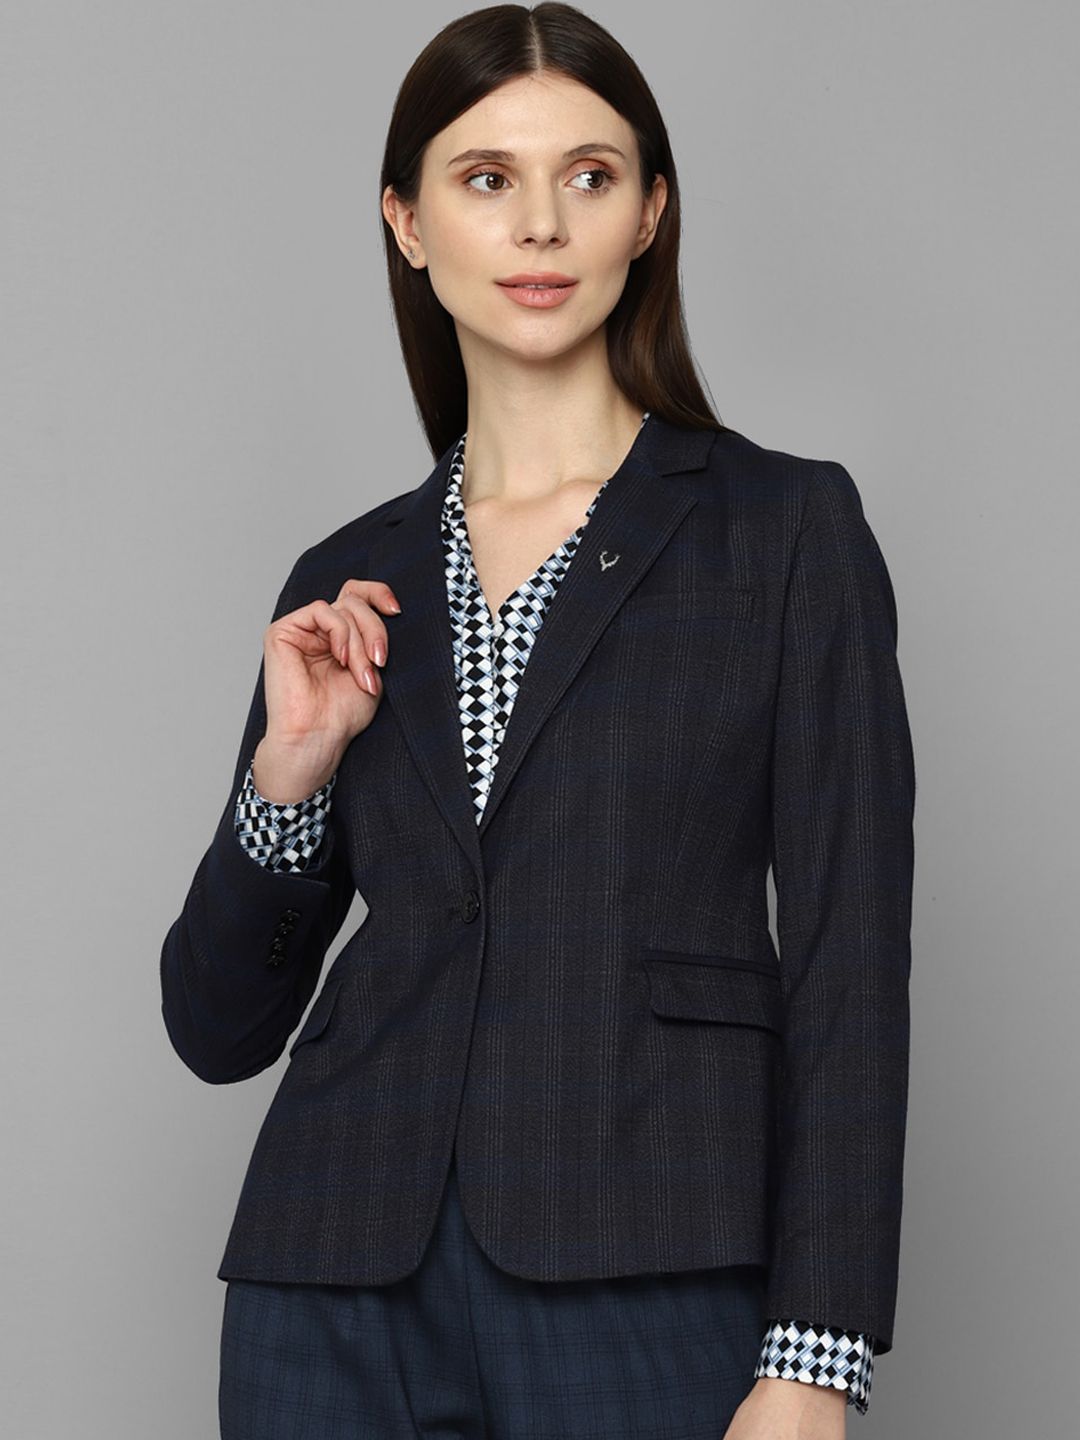 Allen Solly Woman Navy Blue Checked Slim-Fit Single-Breasted Blazer Price in India